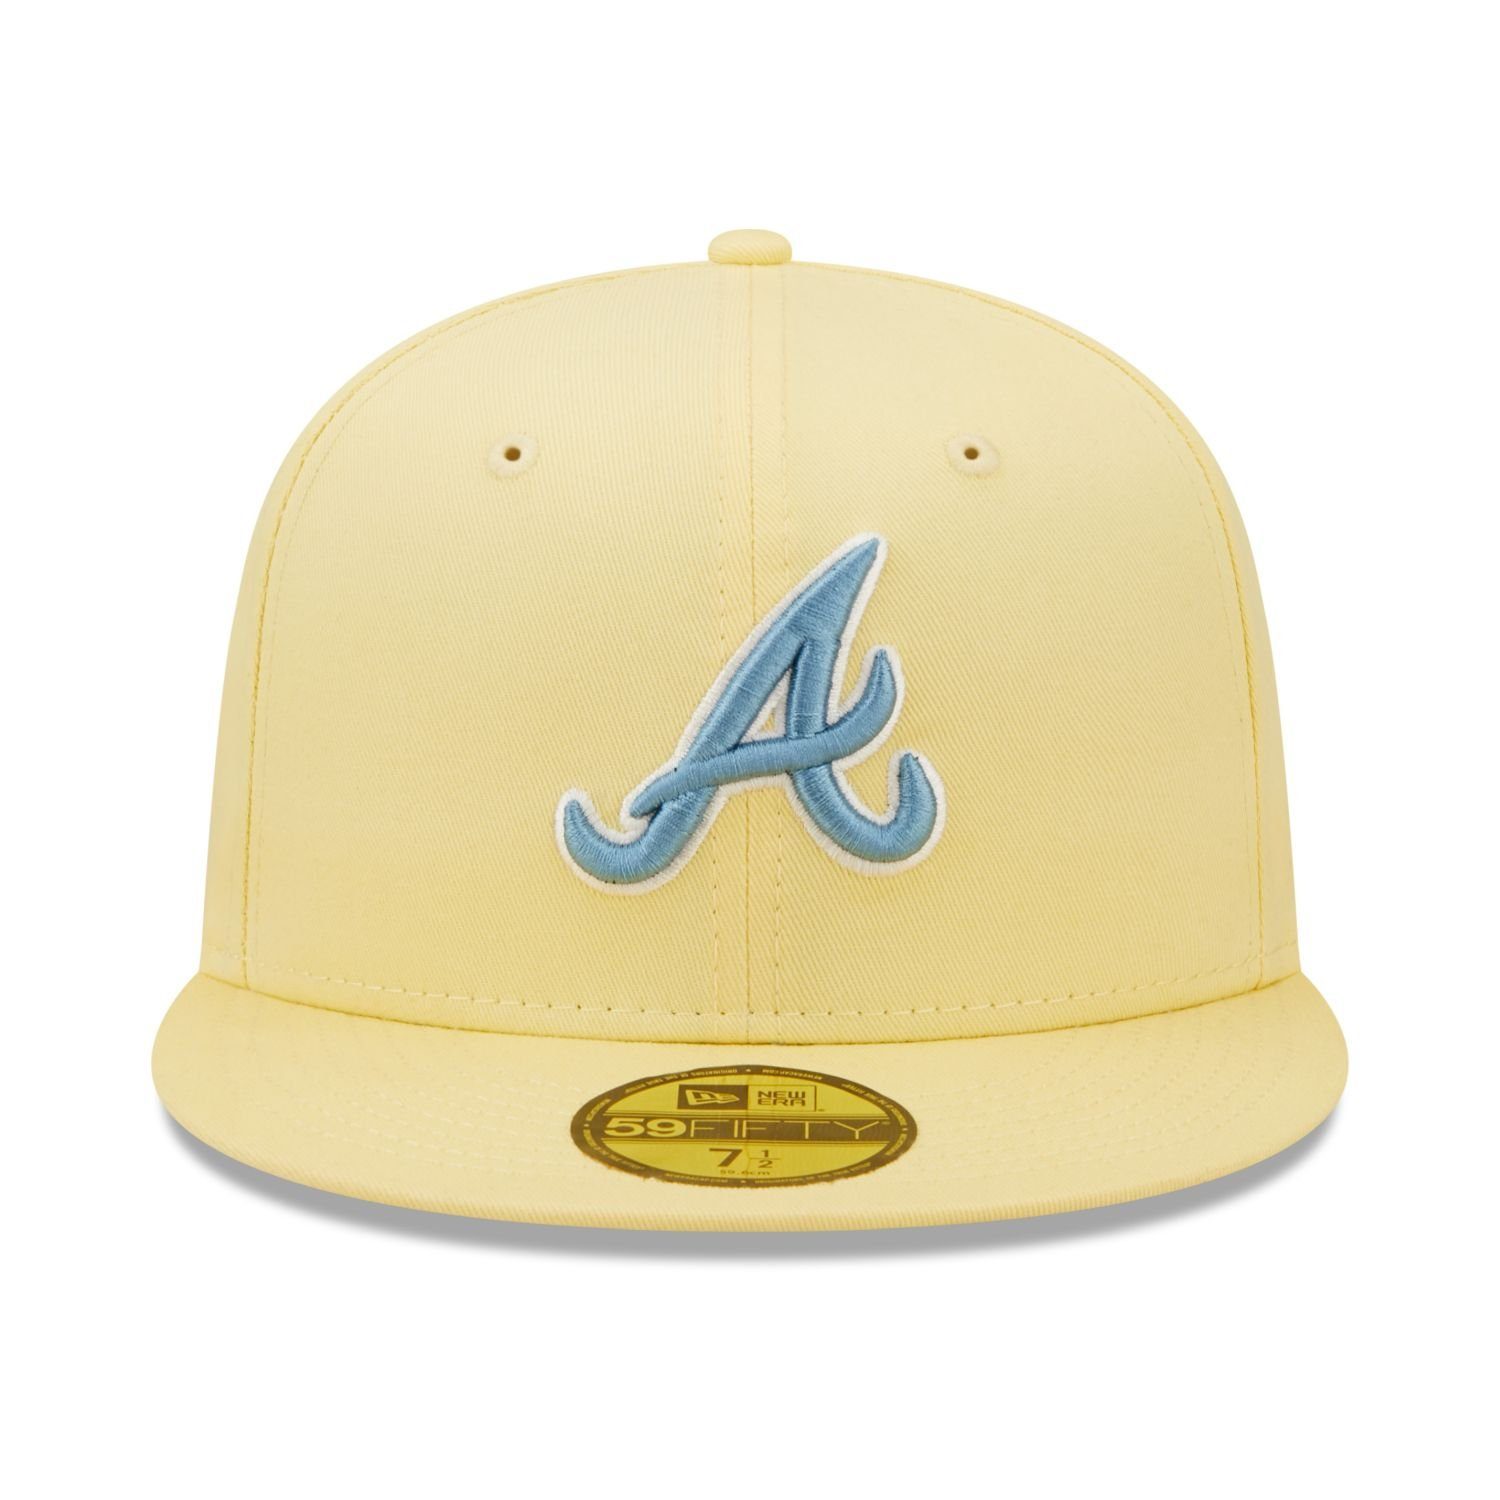 New Era Fitted Cap 59Fifty Braves COOPERSTOWN Atlanta